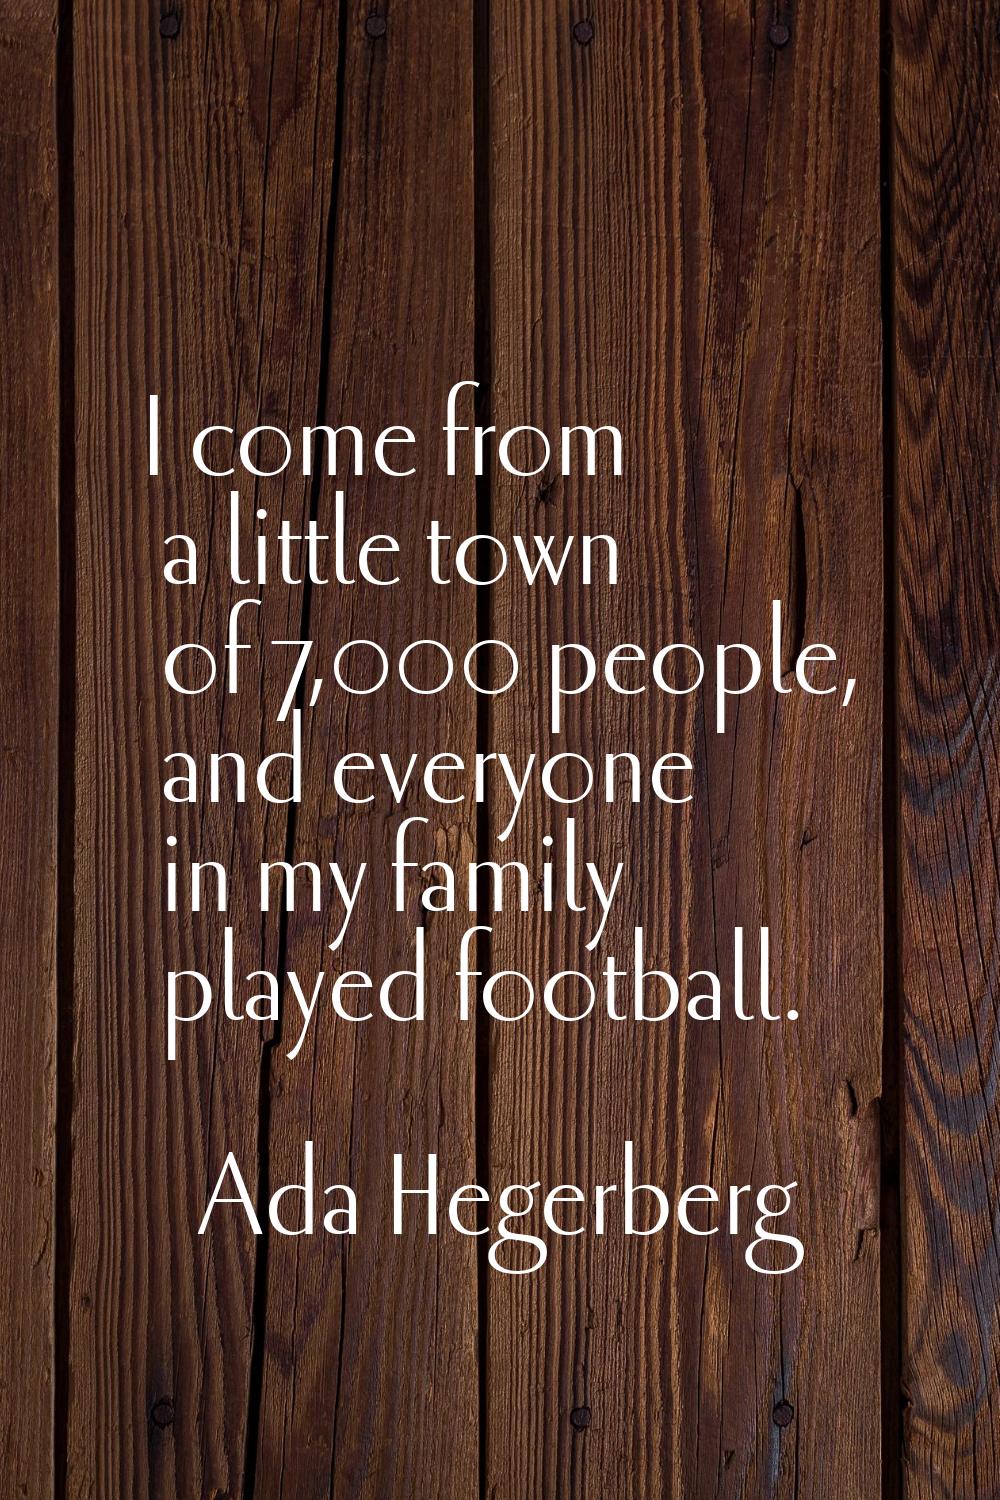 I come from a little town of 7,000 people, and everyone in my family played football.